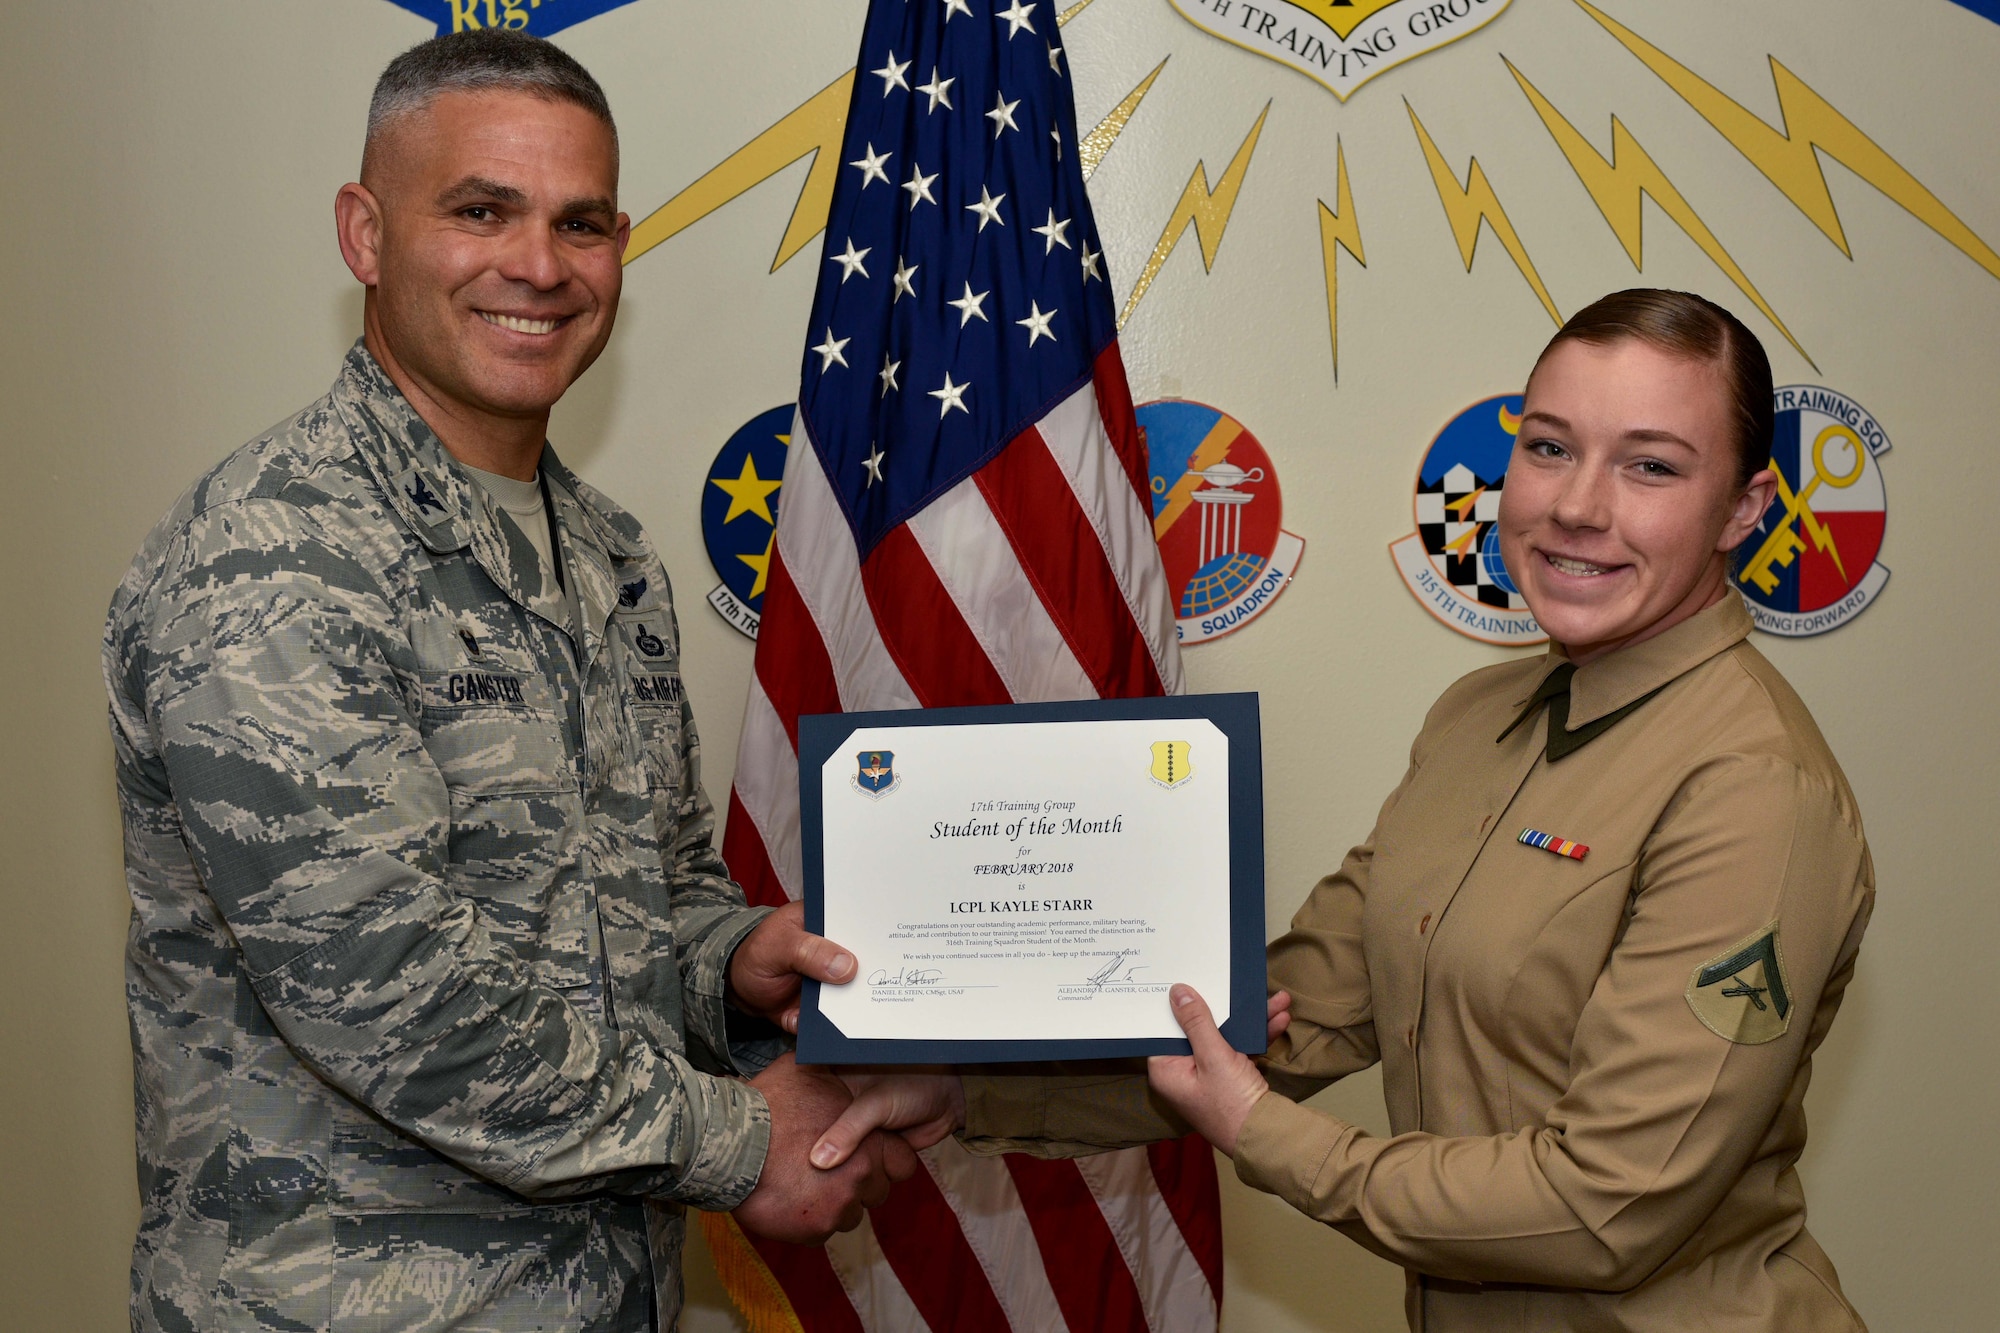 U.S. Air Force Col. Alex Ganster, 17th Training Group commander, presents the 17th TRG Student of the Month certificate to U.S. Marine Corps Lance Cpl. Kayle Starr, 316th Training Squadron trainee, in Brandenburg Hall on Goodfellow Air Force Base, Texas, March 2, 2018. The 316th TRS’s mission is to conduct U.S. Air Force, U.S. Army, U.S. Marine Corps, U.S. Navy and U.S. Coast Guard cryptologic, human intelligence and military training.  (U.S. Air Force photo by Senior Airman Randall Moose/Released)